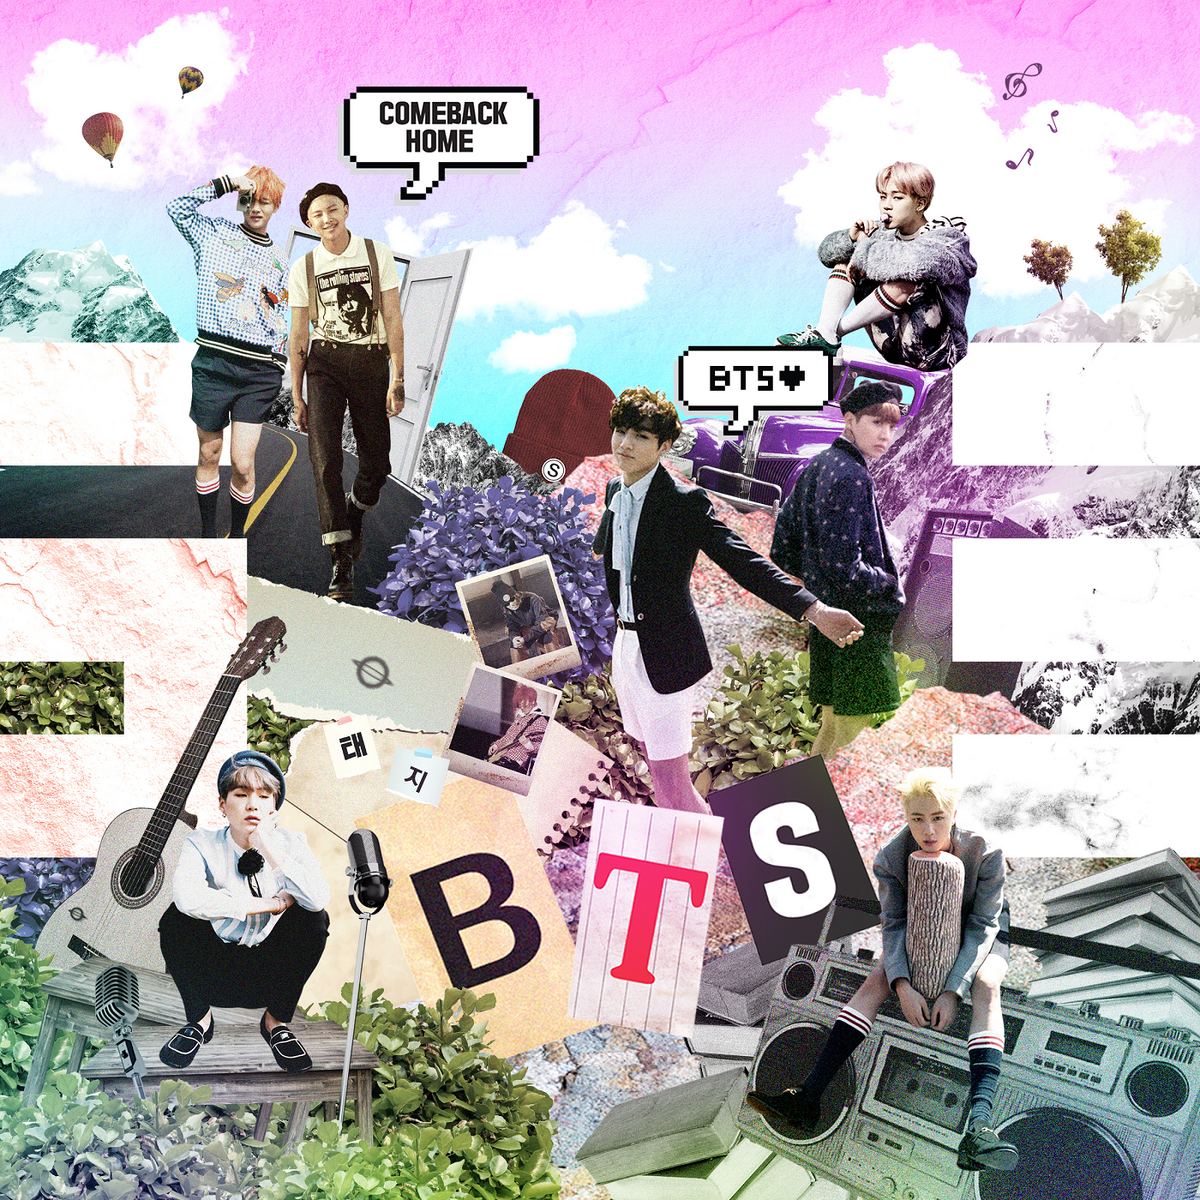 Come back Home BTS обложка. БТС камбэк хоум. Yet to come BTS обложка. Home BTS альбом. He comes back home